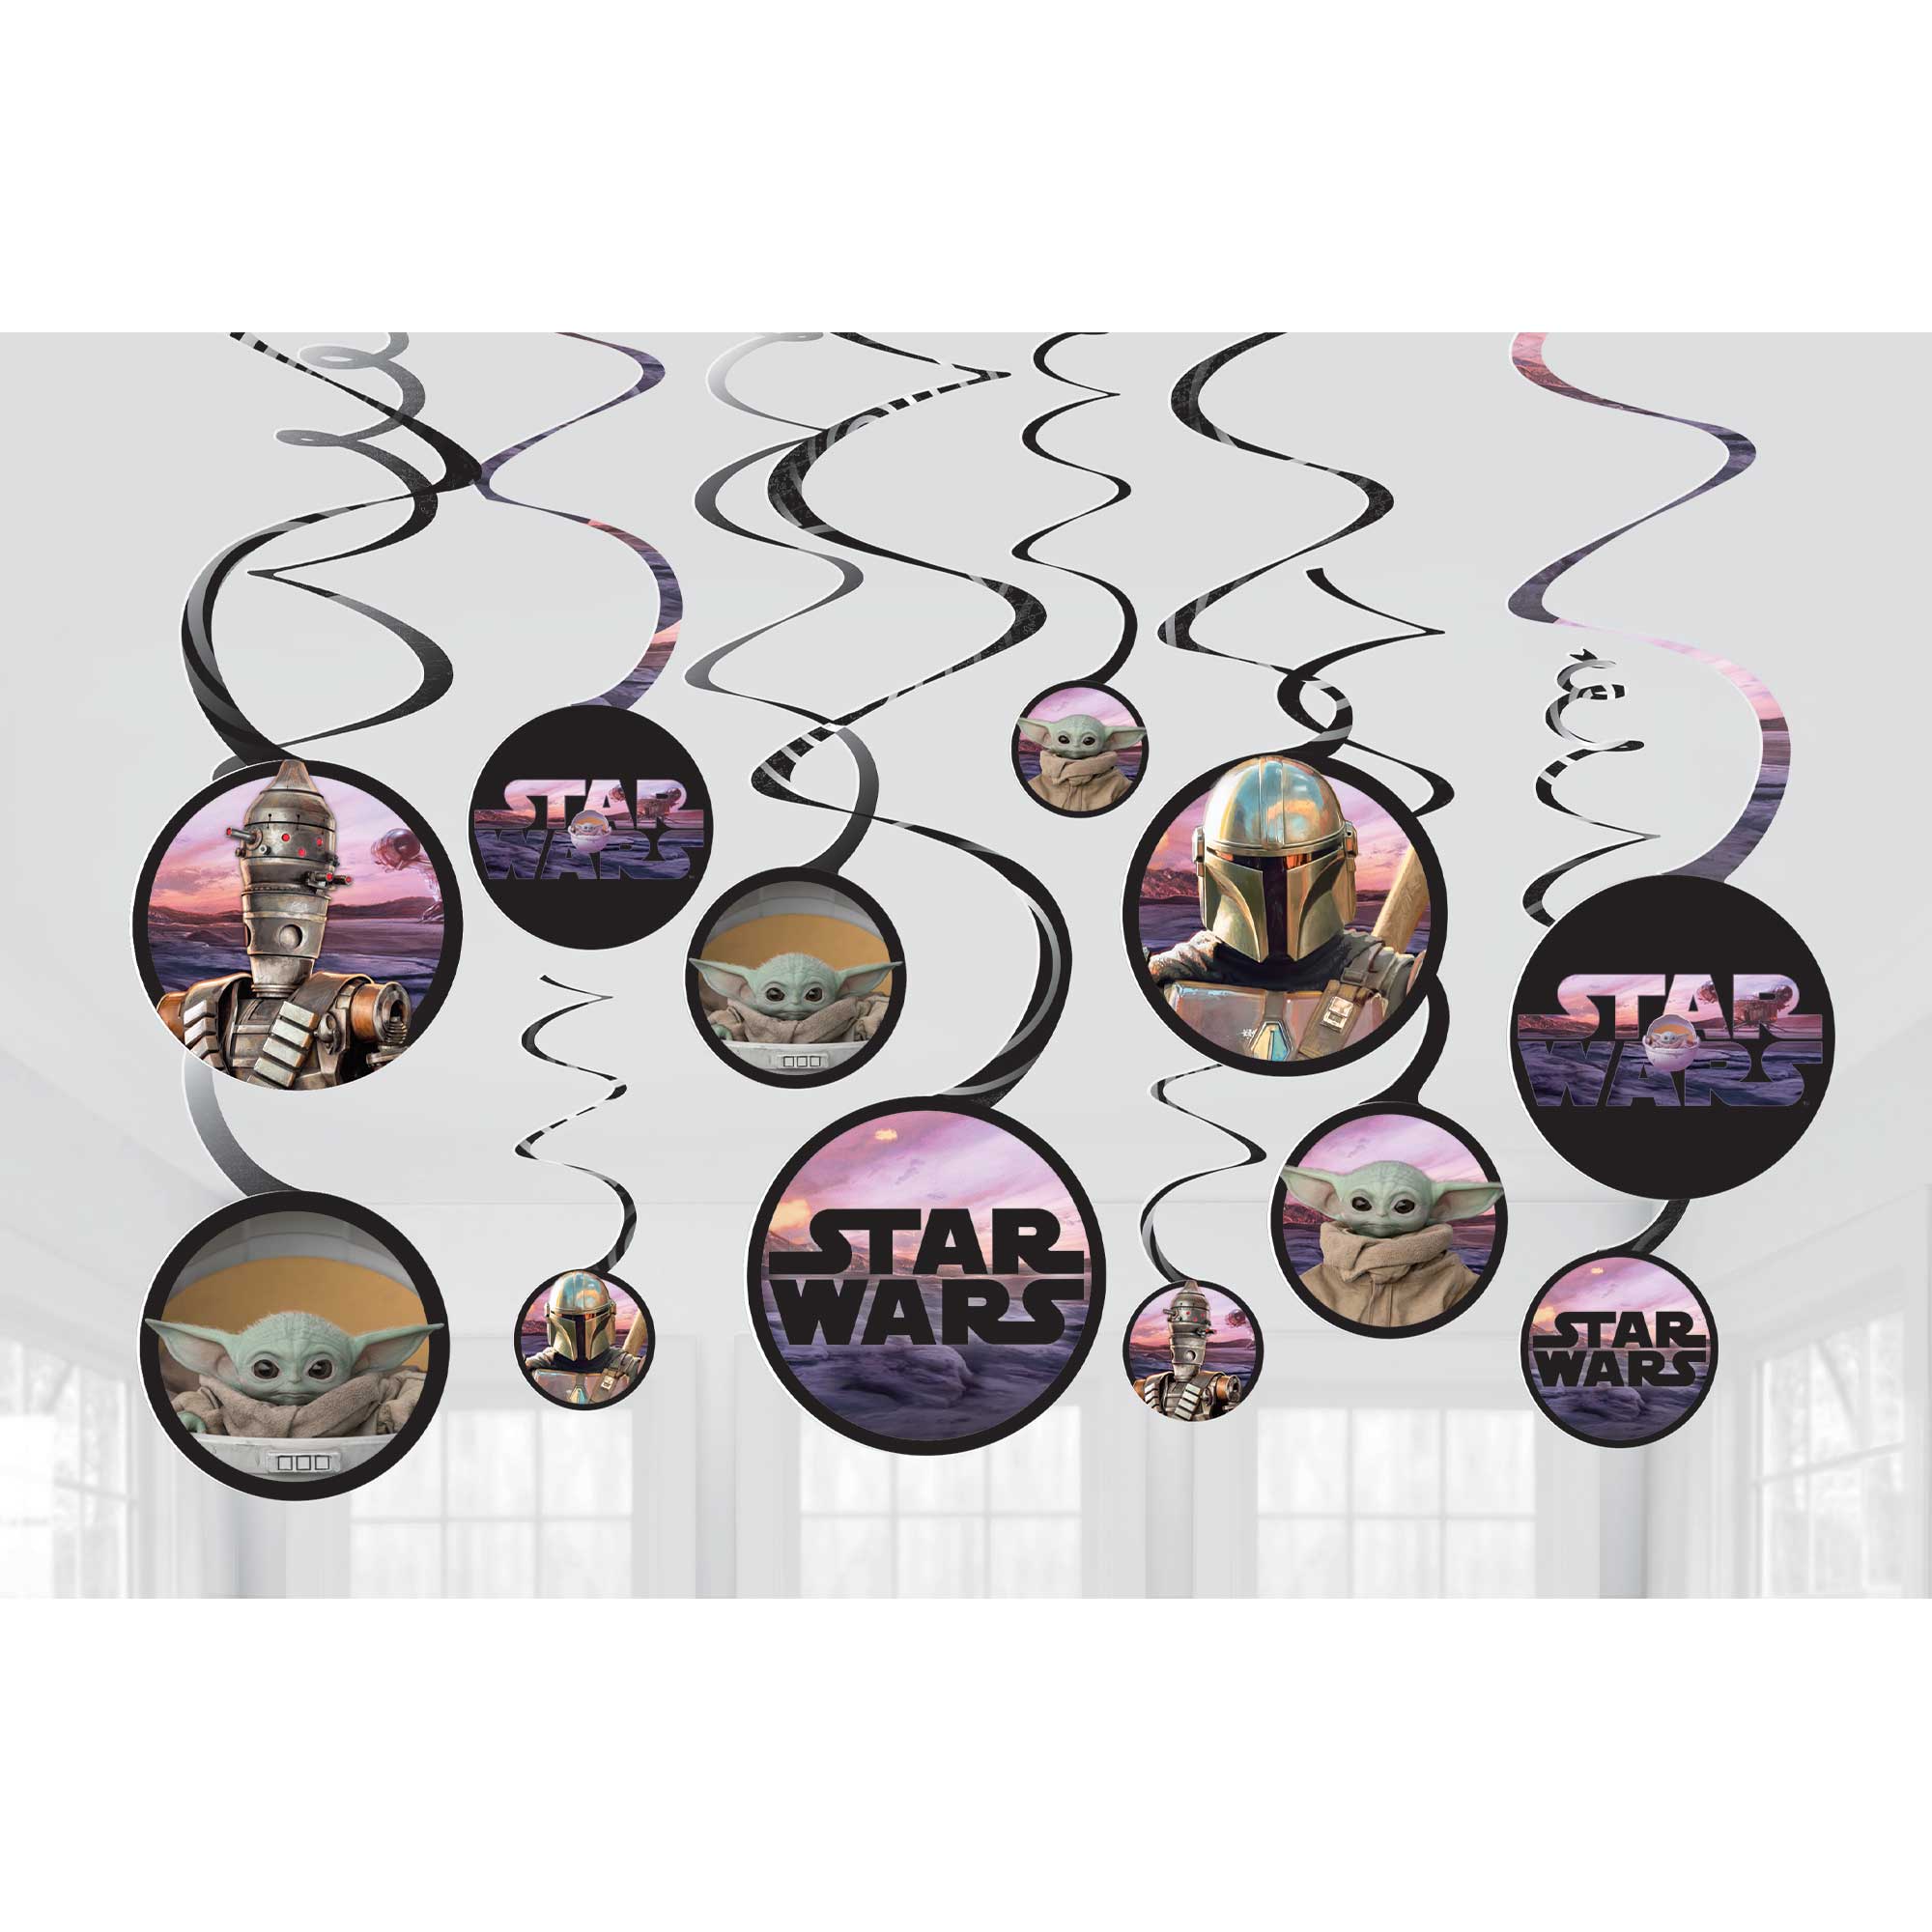 Star Wars The Mandalorian Spiral Swirl Decorations Value Pack - 12 Pack Default Title